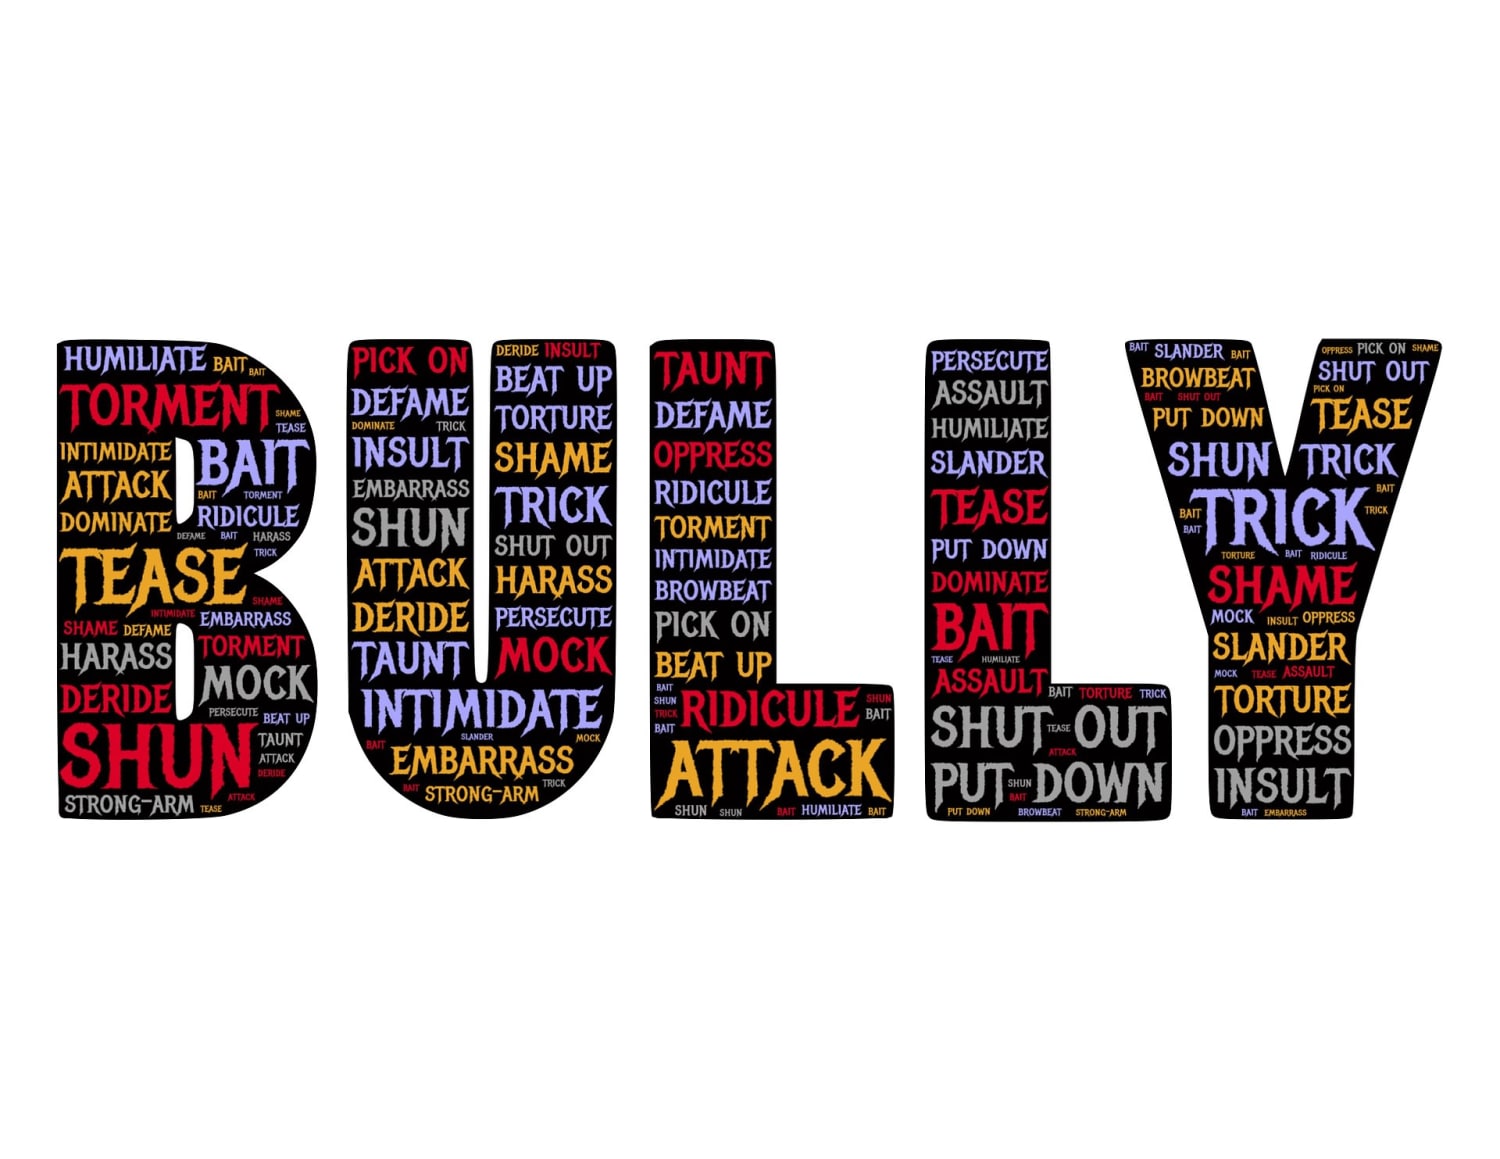 Learning to Name Workplace Bullying